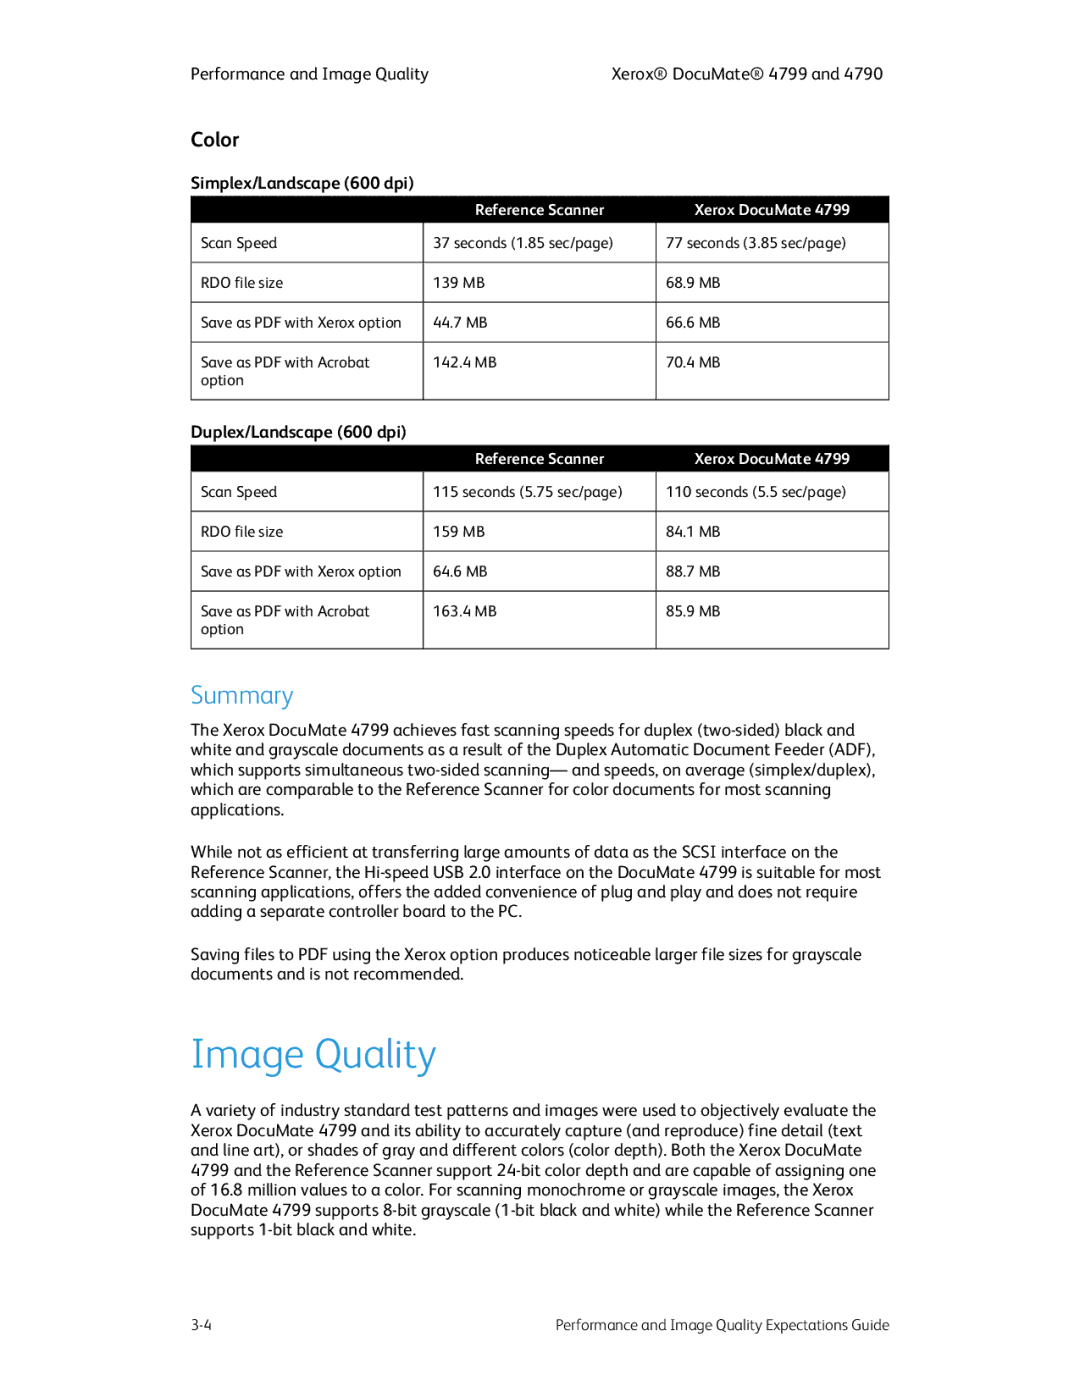 Xerox 4790 specifications Image Quality, Summary 